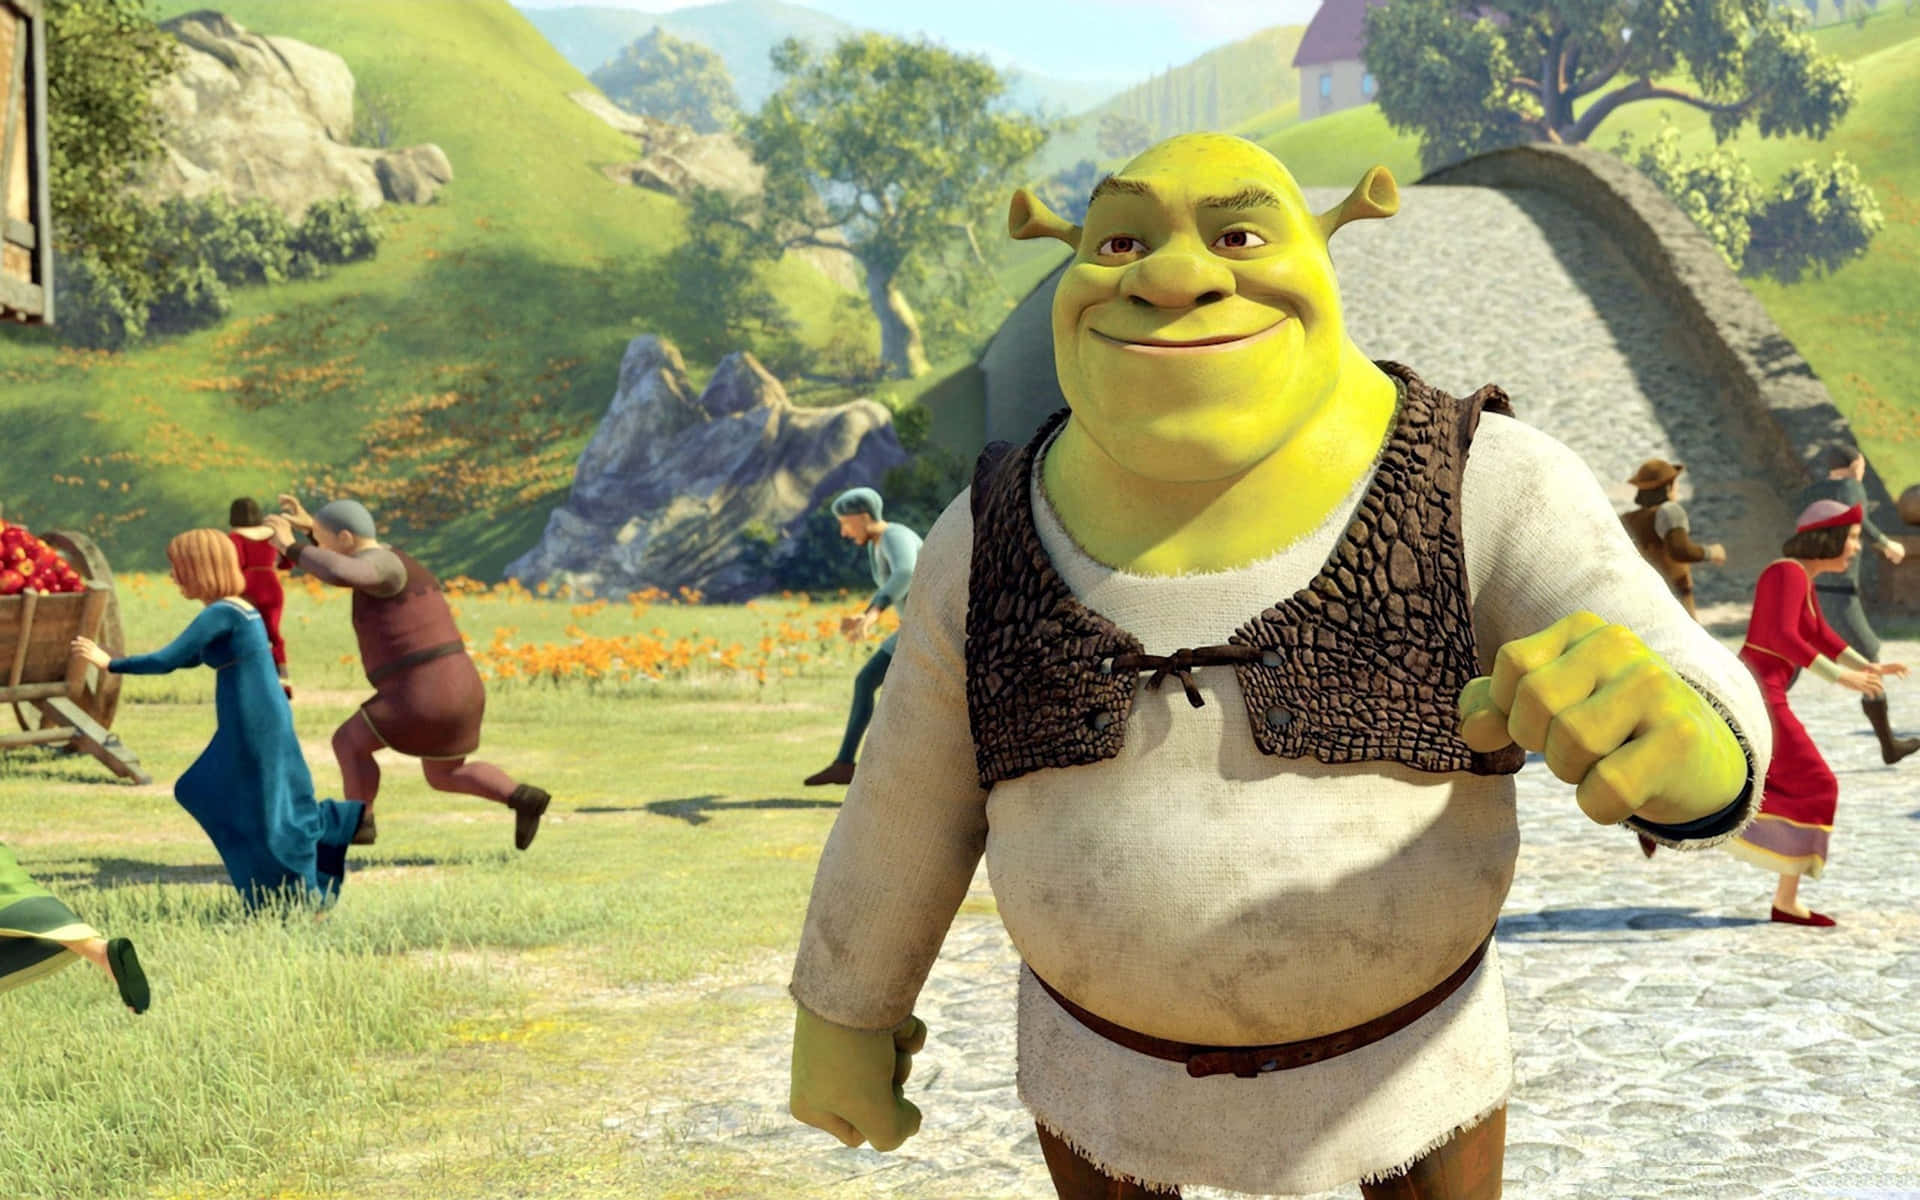 Shrek and the gang share a laugh.